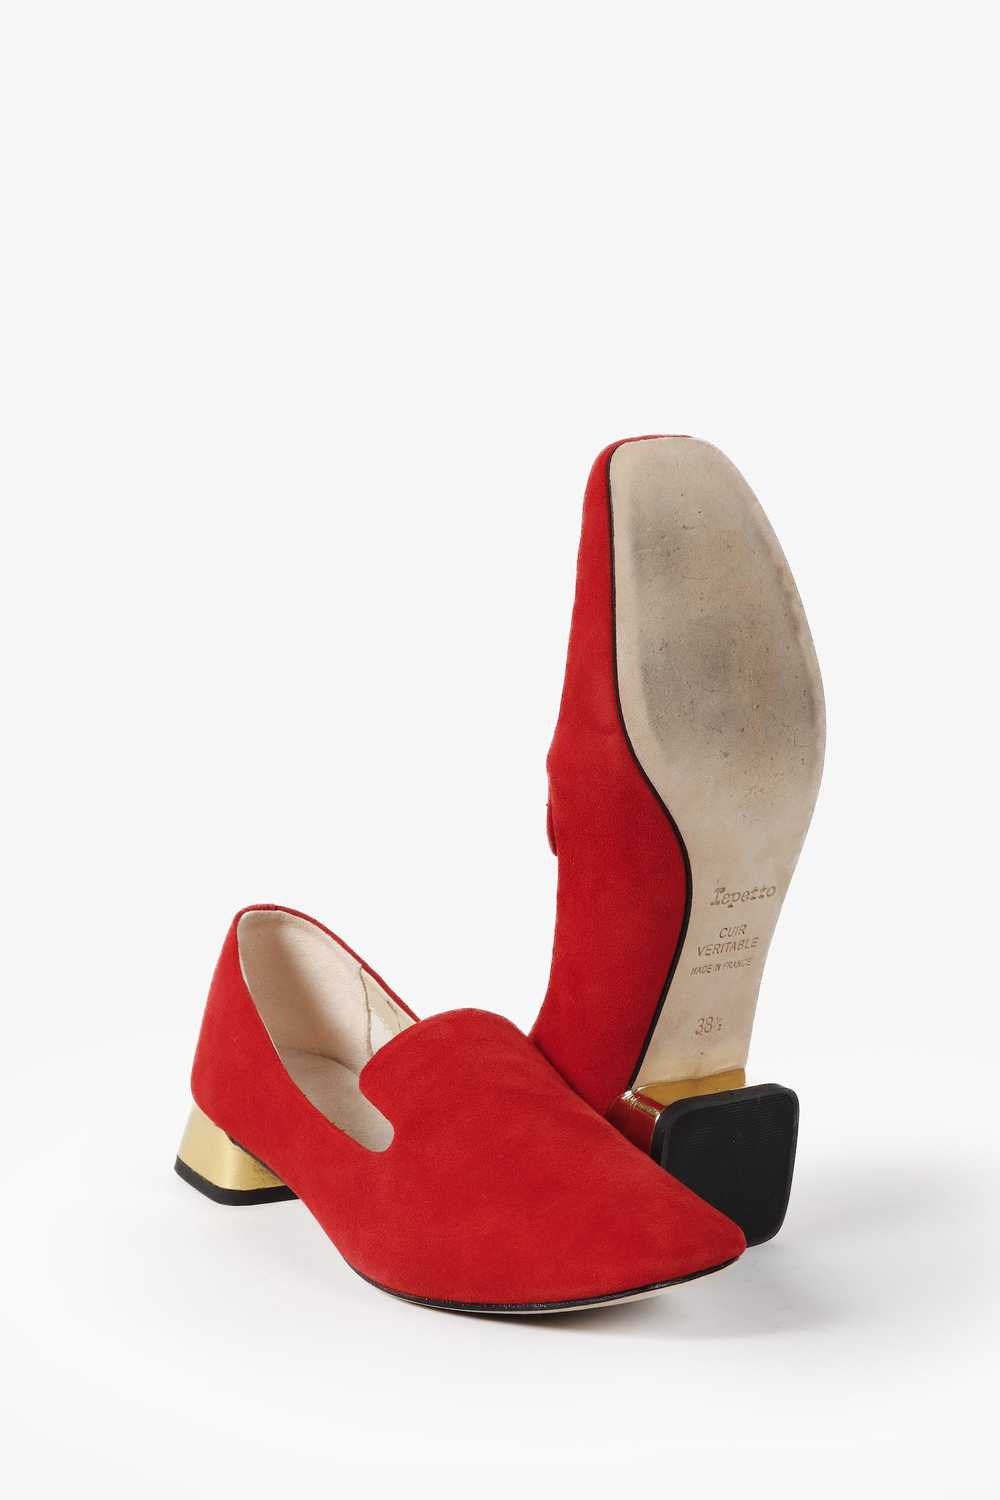 Repetto Repetto Red Suede Mathis Loafers - image 4